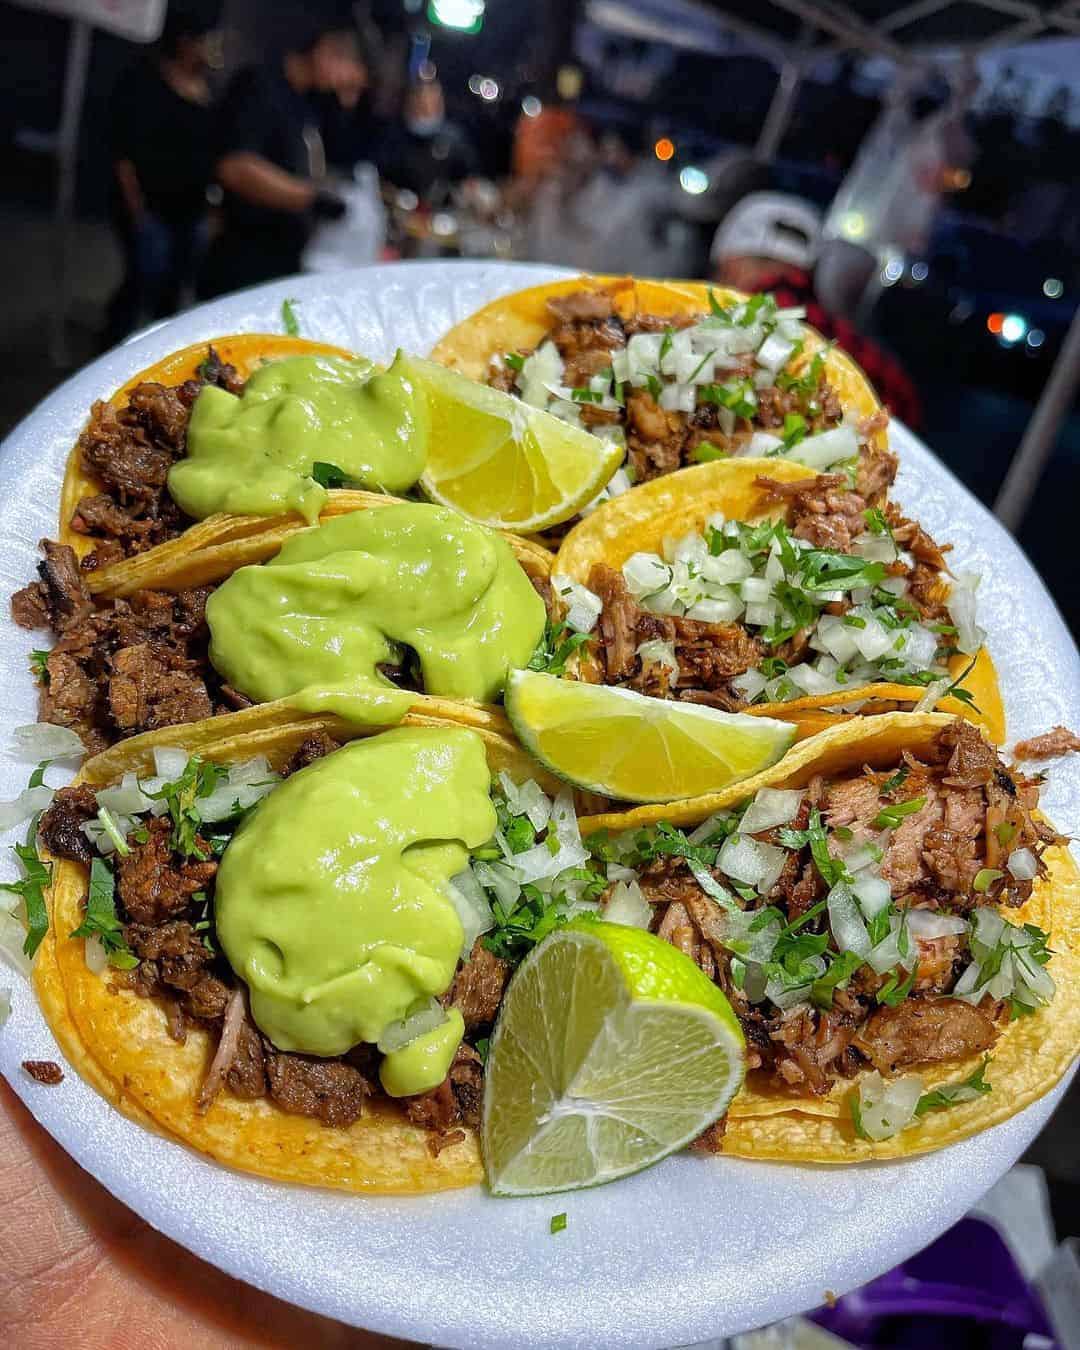 The best Tacos al Pastor in Jacksonville Florida! Grilled pork, corn tortillas, grilled pineapple. Served with onion, cilantro and lime.